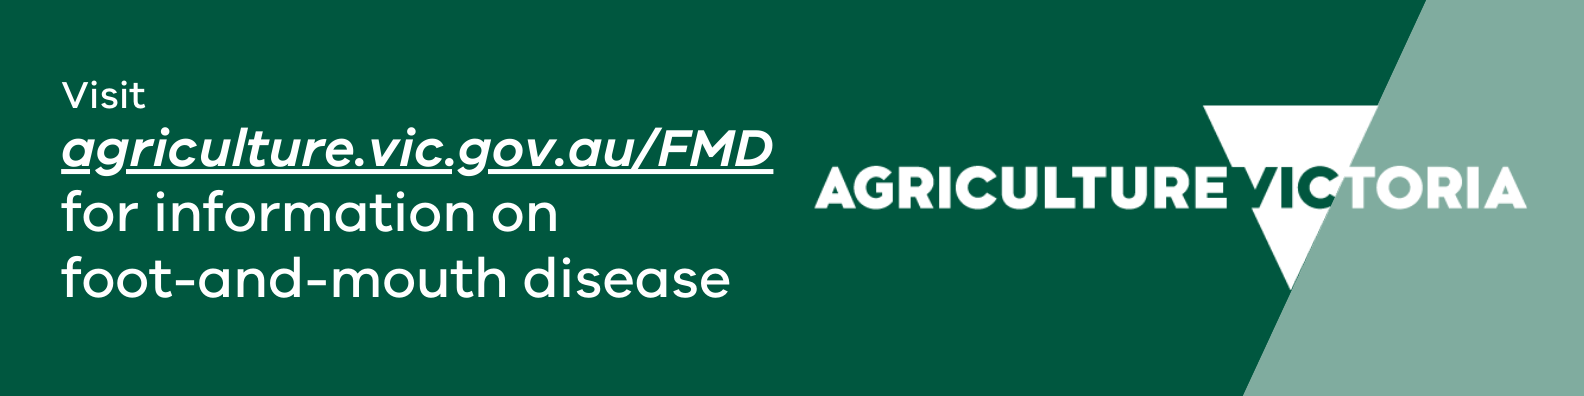 Image description: Green banner with Agriculture Victoria logo. Text reads: Visit agriculture.vic.gov.au/FMD for information on foot-and-mouth disease